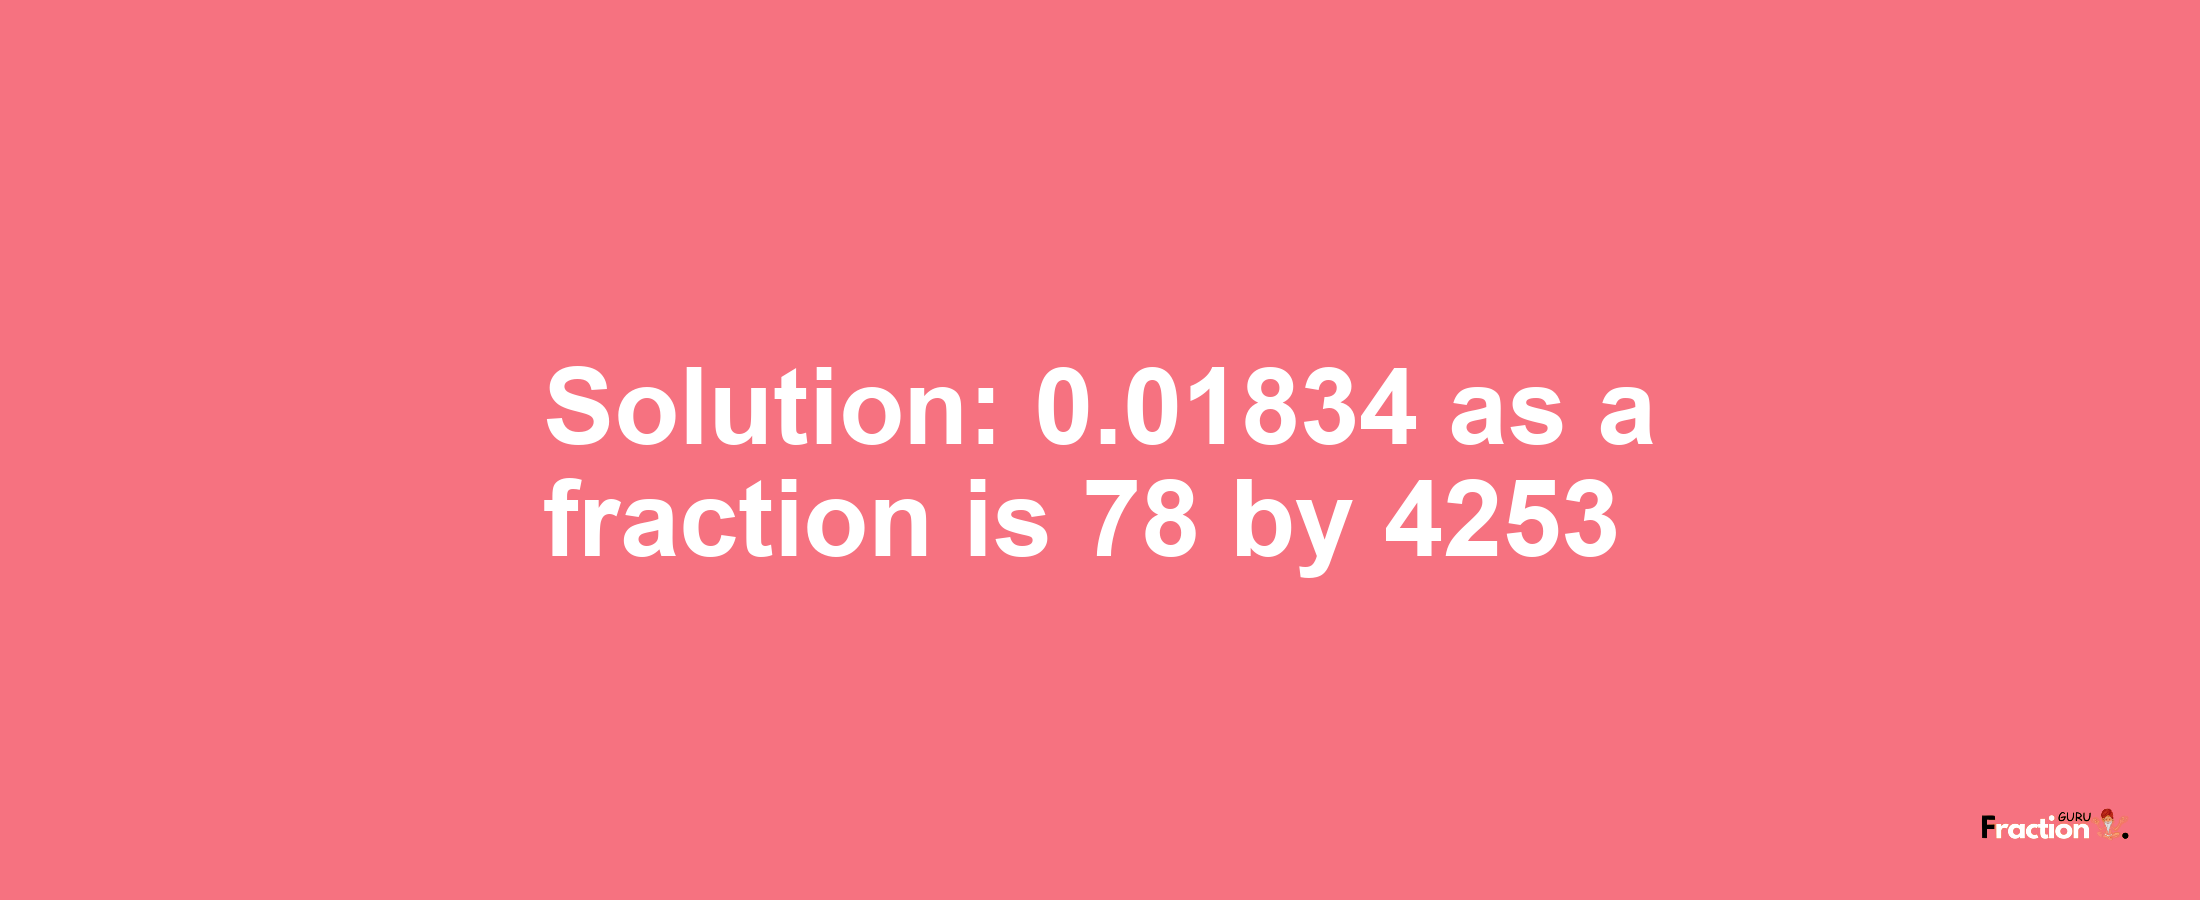 Solution:0.01834 as a fraction is 78/4253